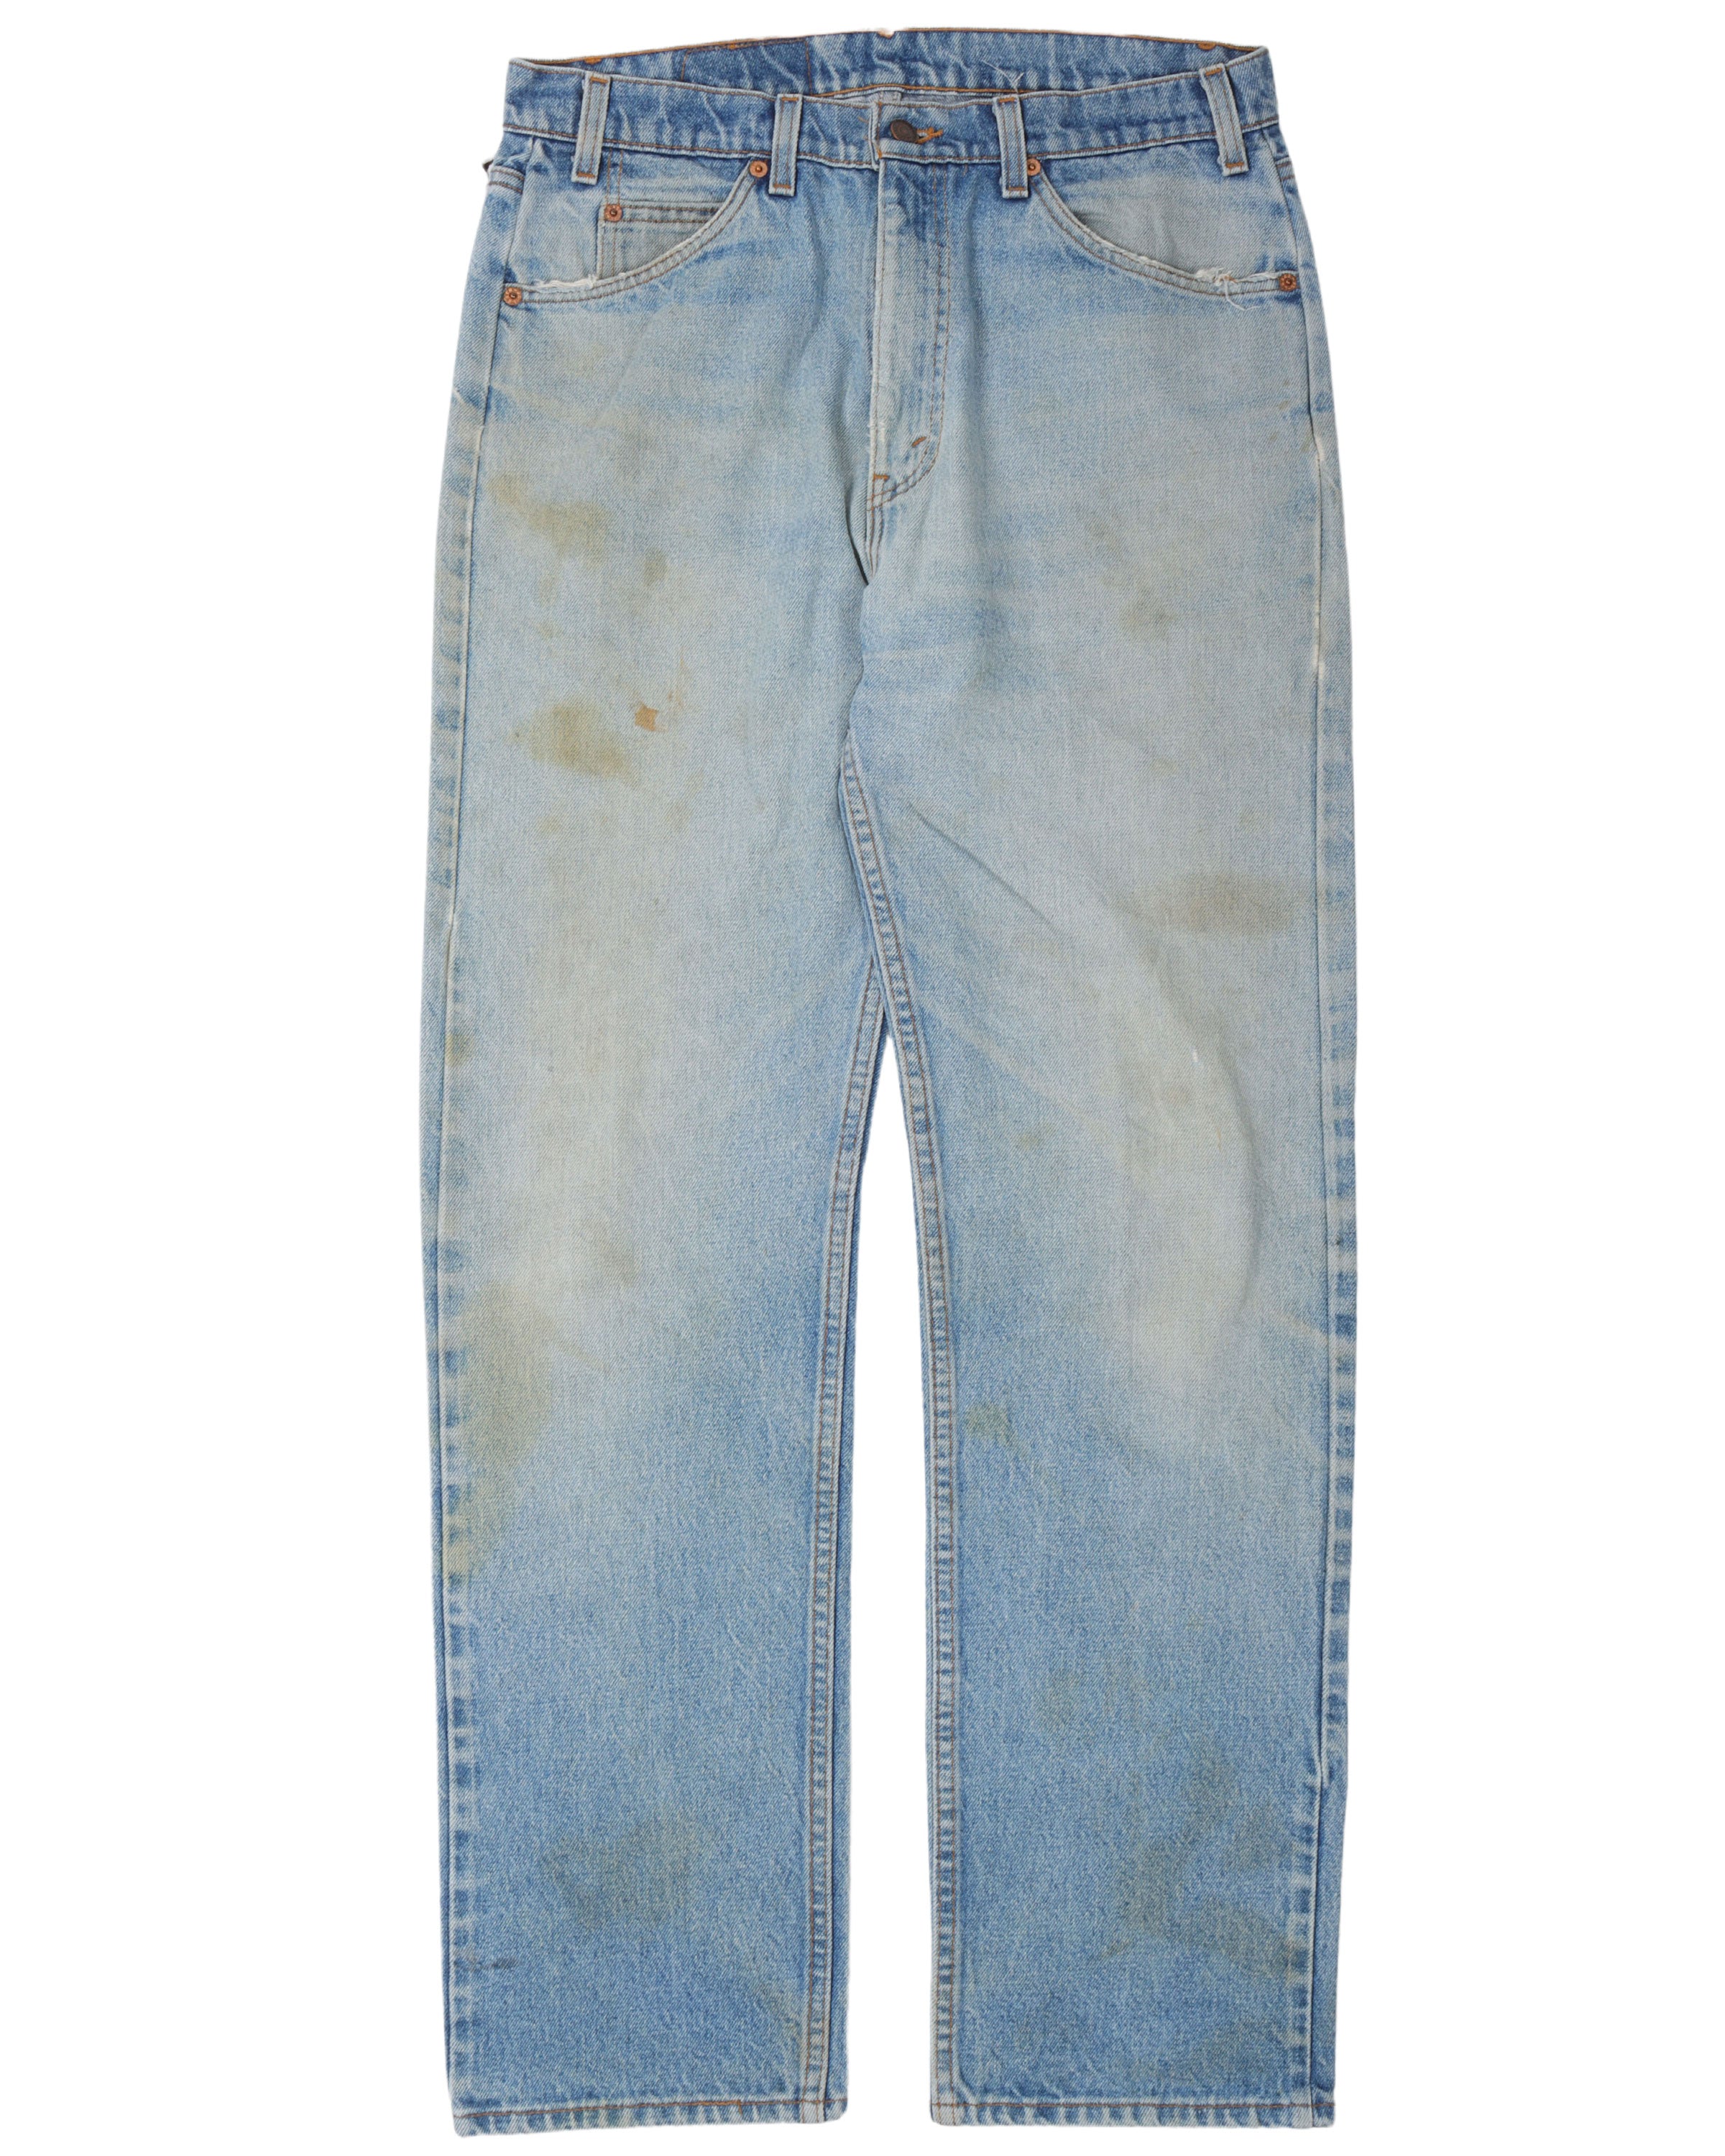 Levi's 501 Stained Denim